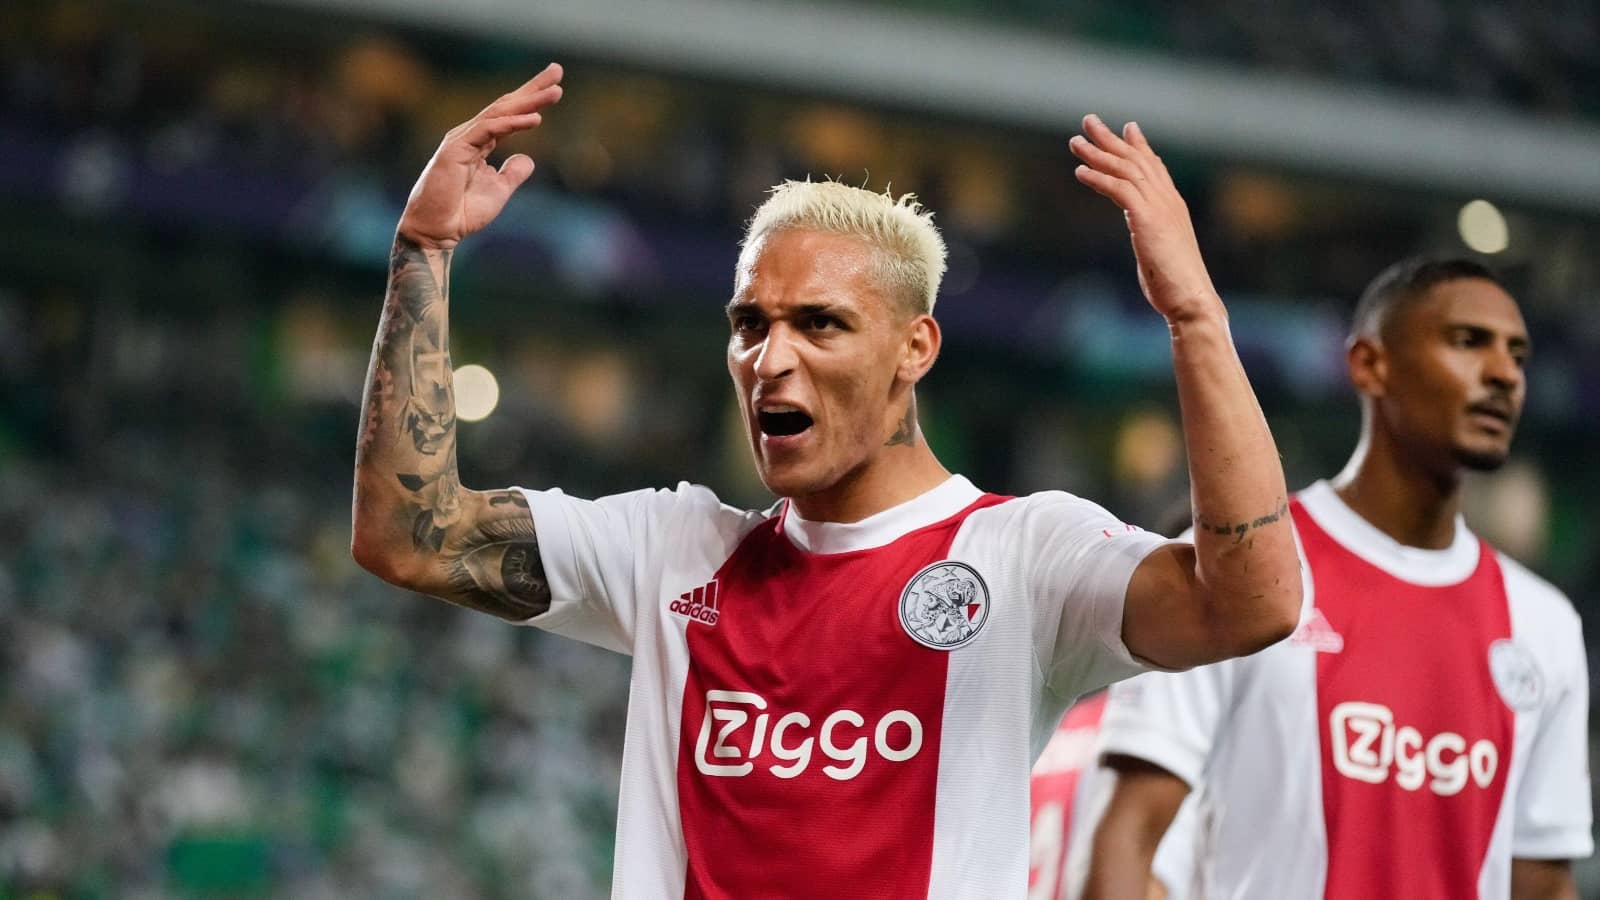 Anthony returns to Manchester United as Ajax stunningly admits rumors